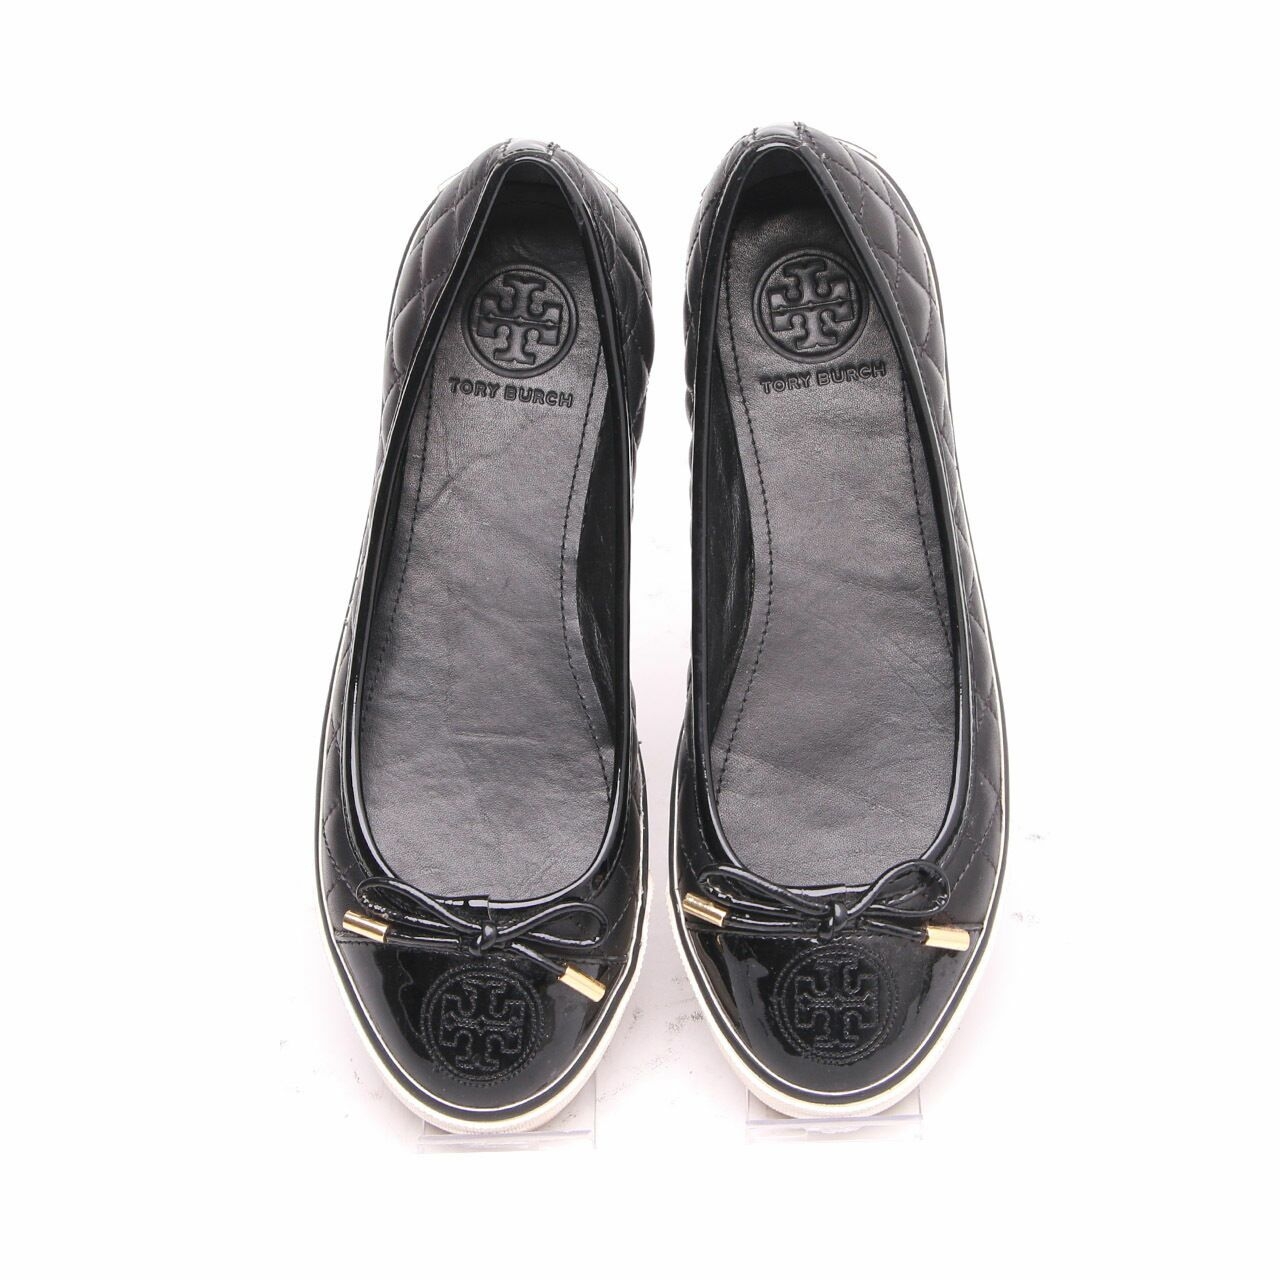 Tory Burch Skyler Quilted Black Flats Shoes